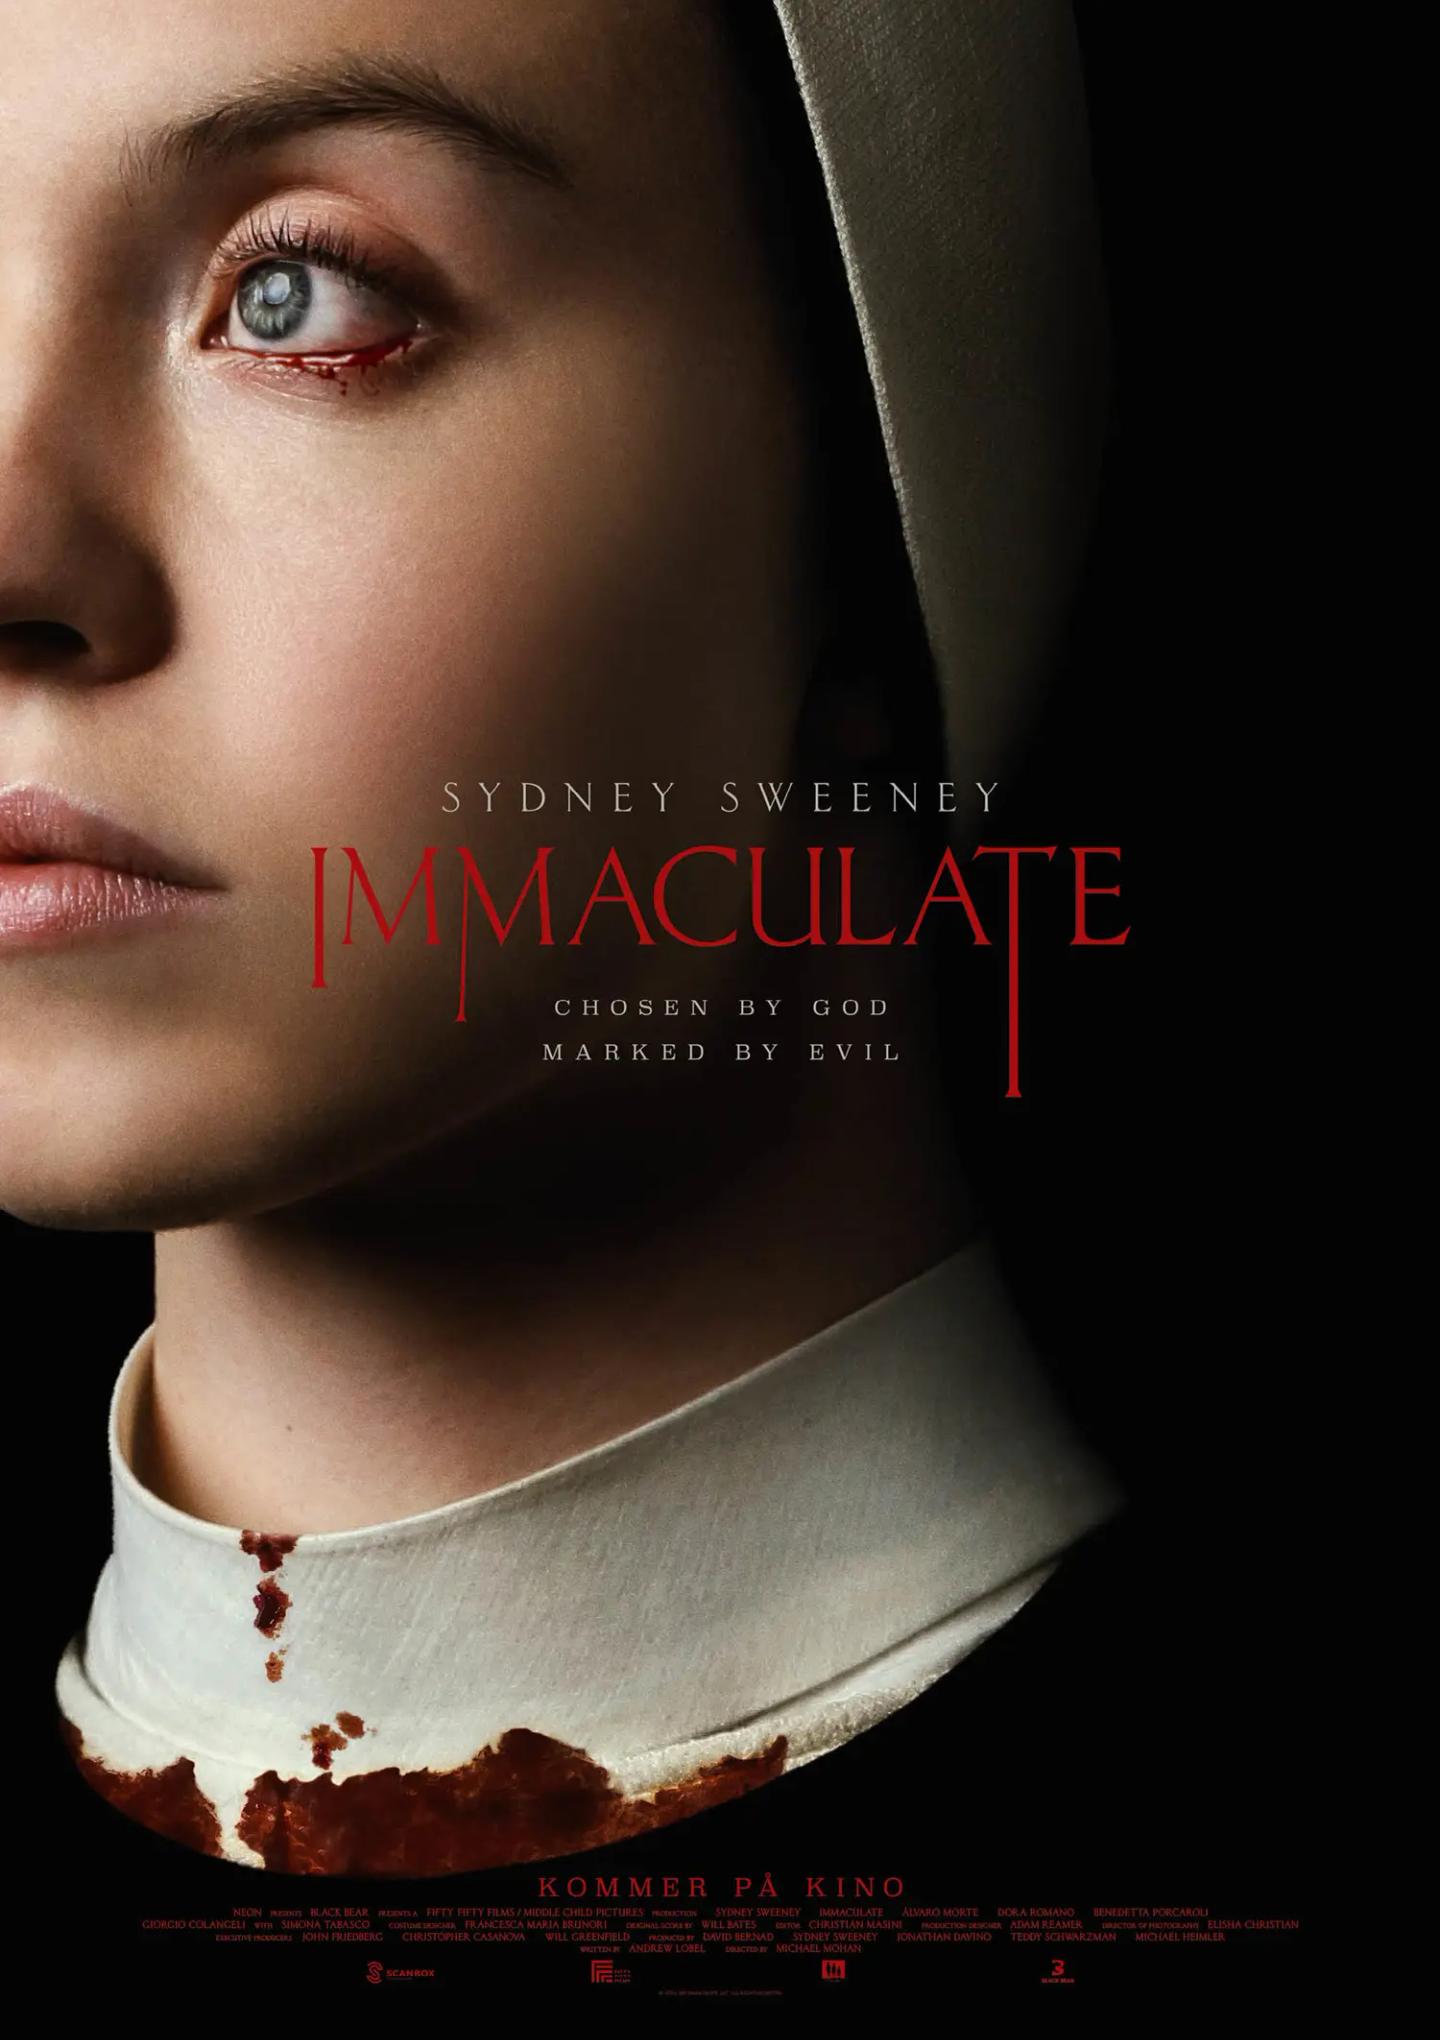 Plakat for 'Immaculate'